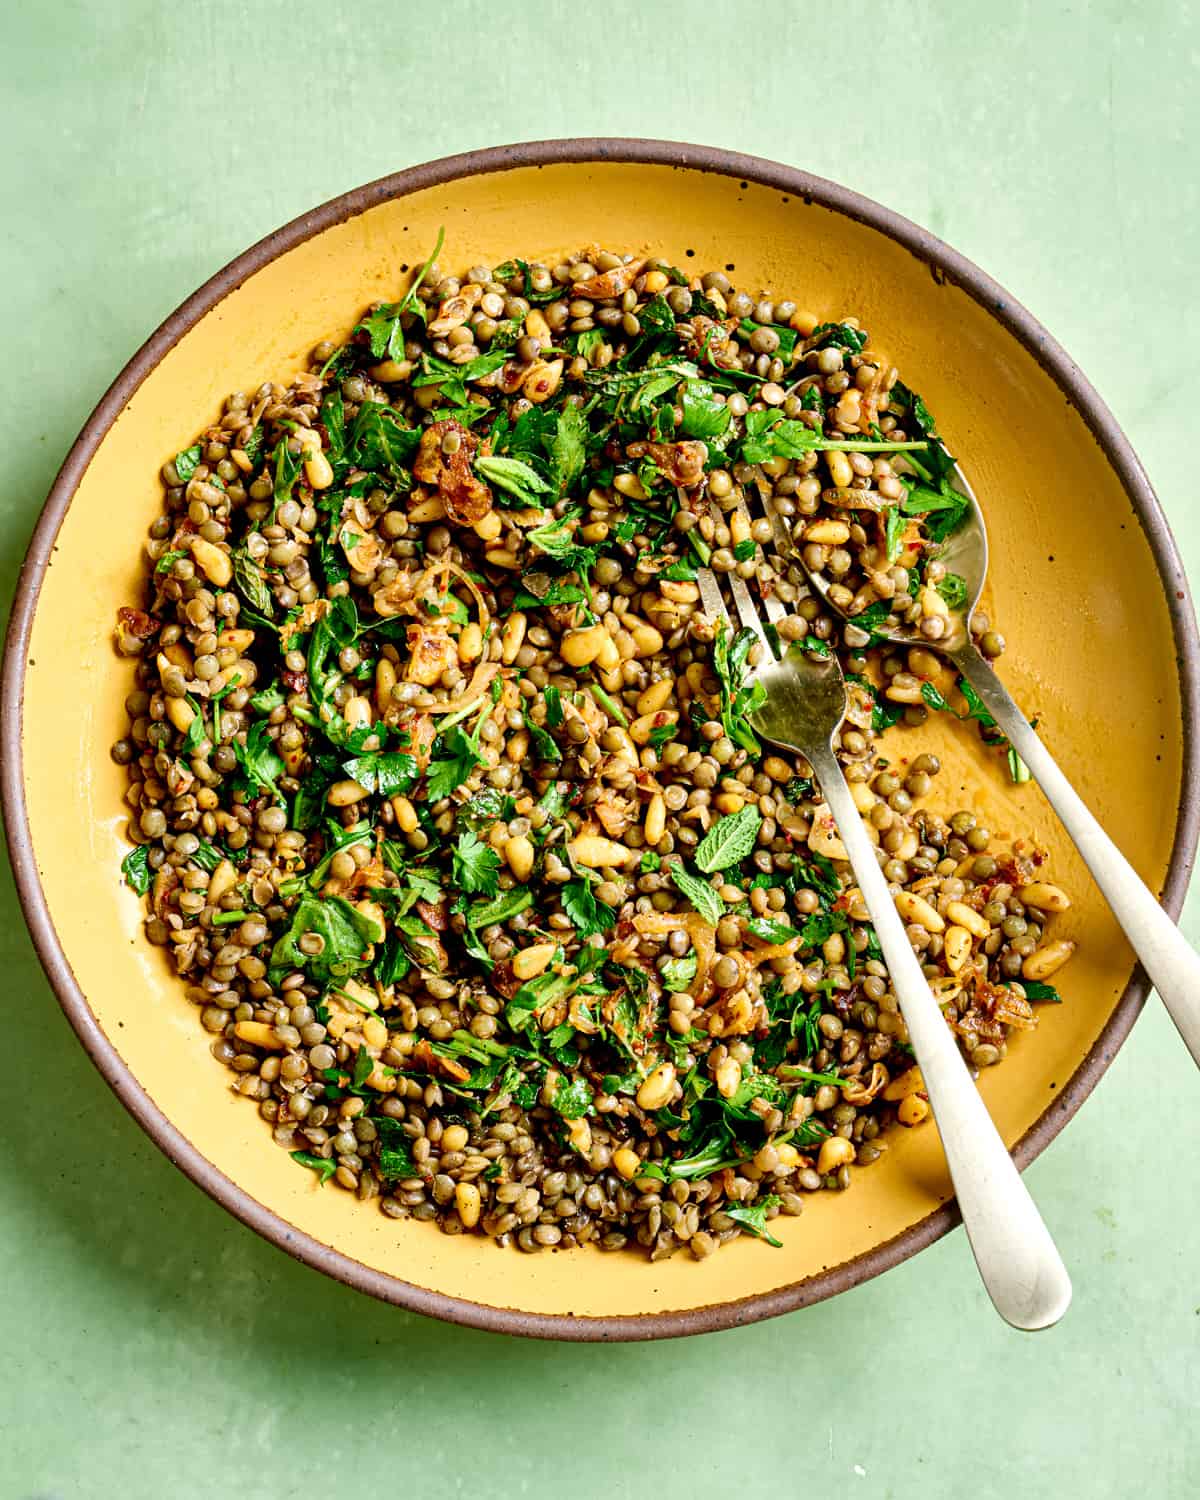 Spoon and fork in lentil salad in a yellow bowl on green table.